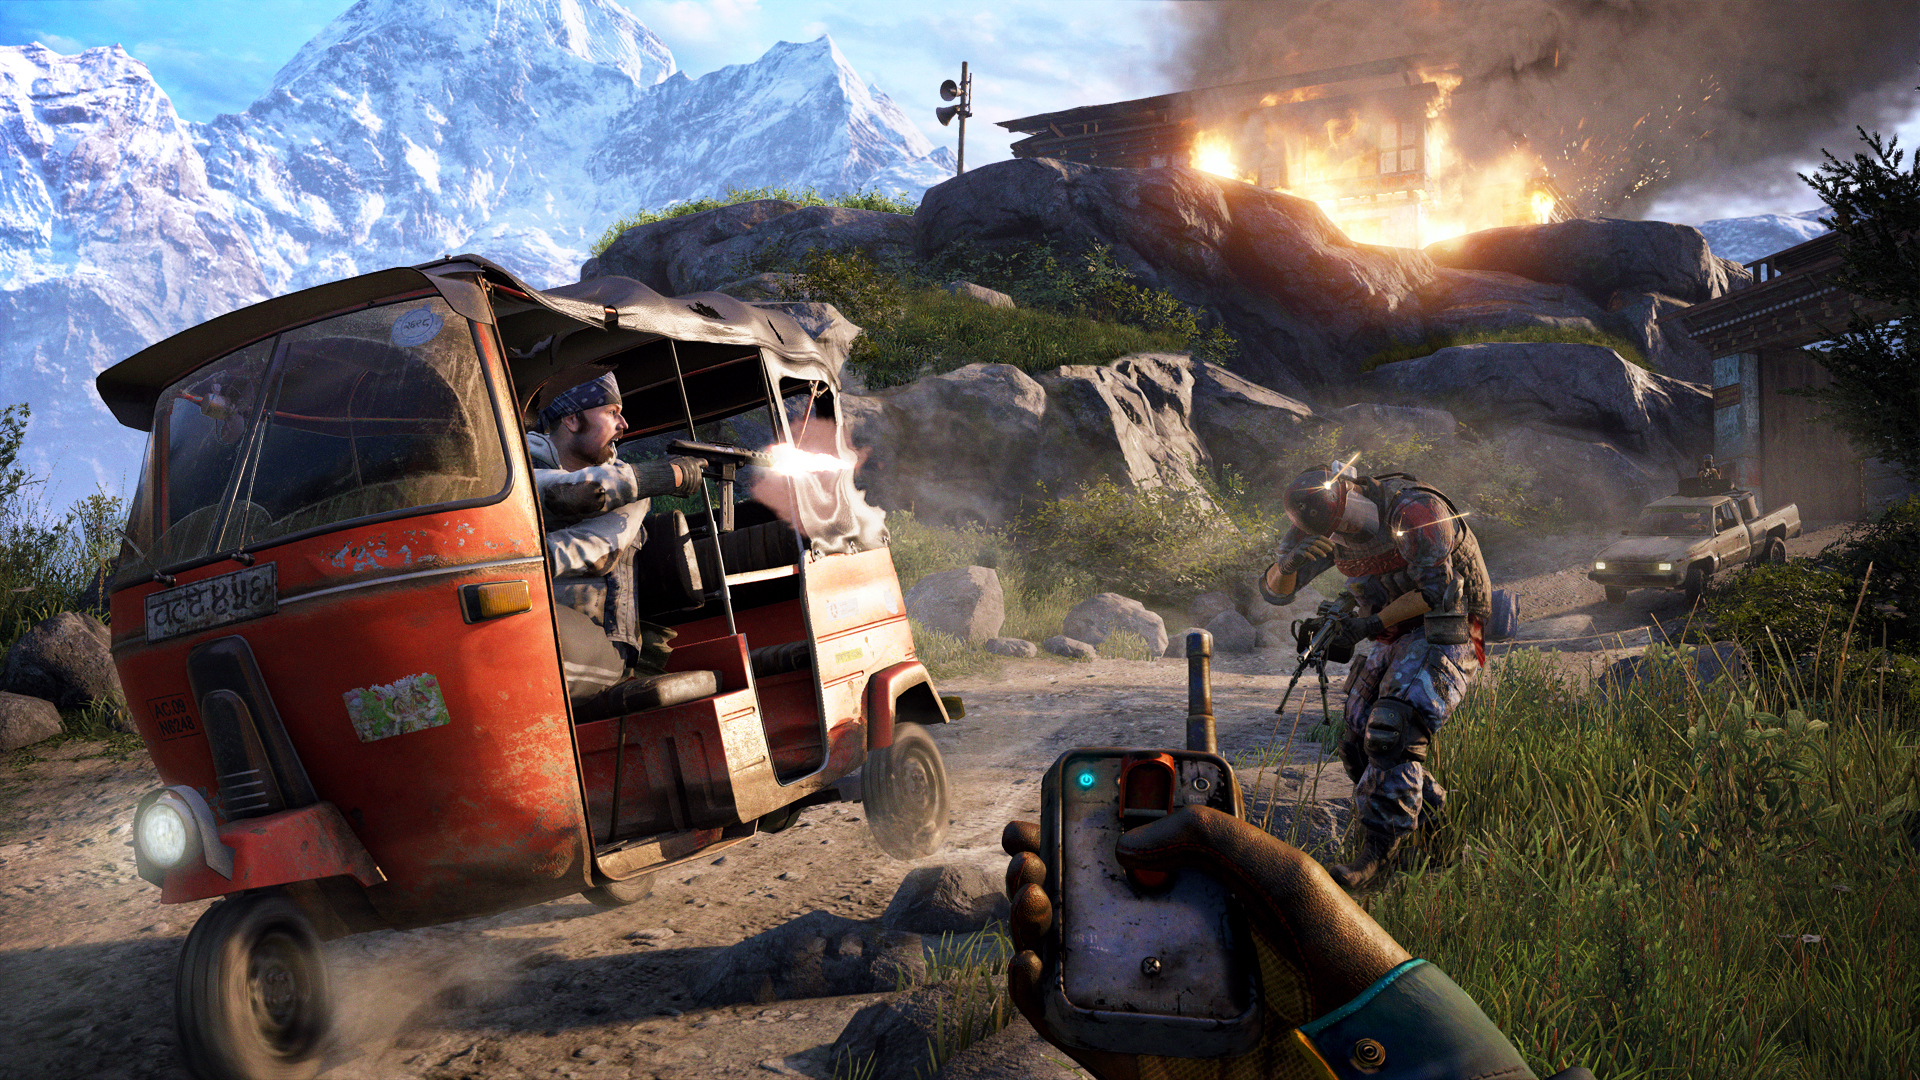 Media asset in full size related to 3dfxzone.it news item entitled as follows: Gameplay trailer e screenshot del first-person shooter Far Cry 4 | Image Name: news21308_Far-Cry-4-screenshot_5.jpg